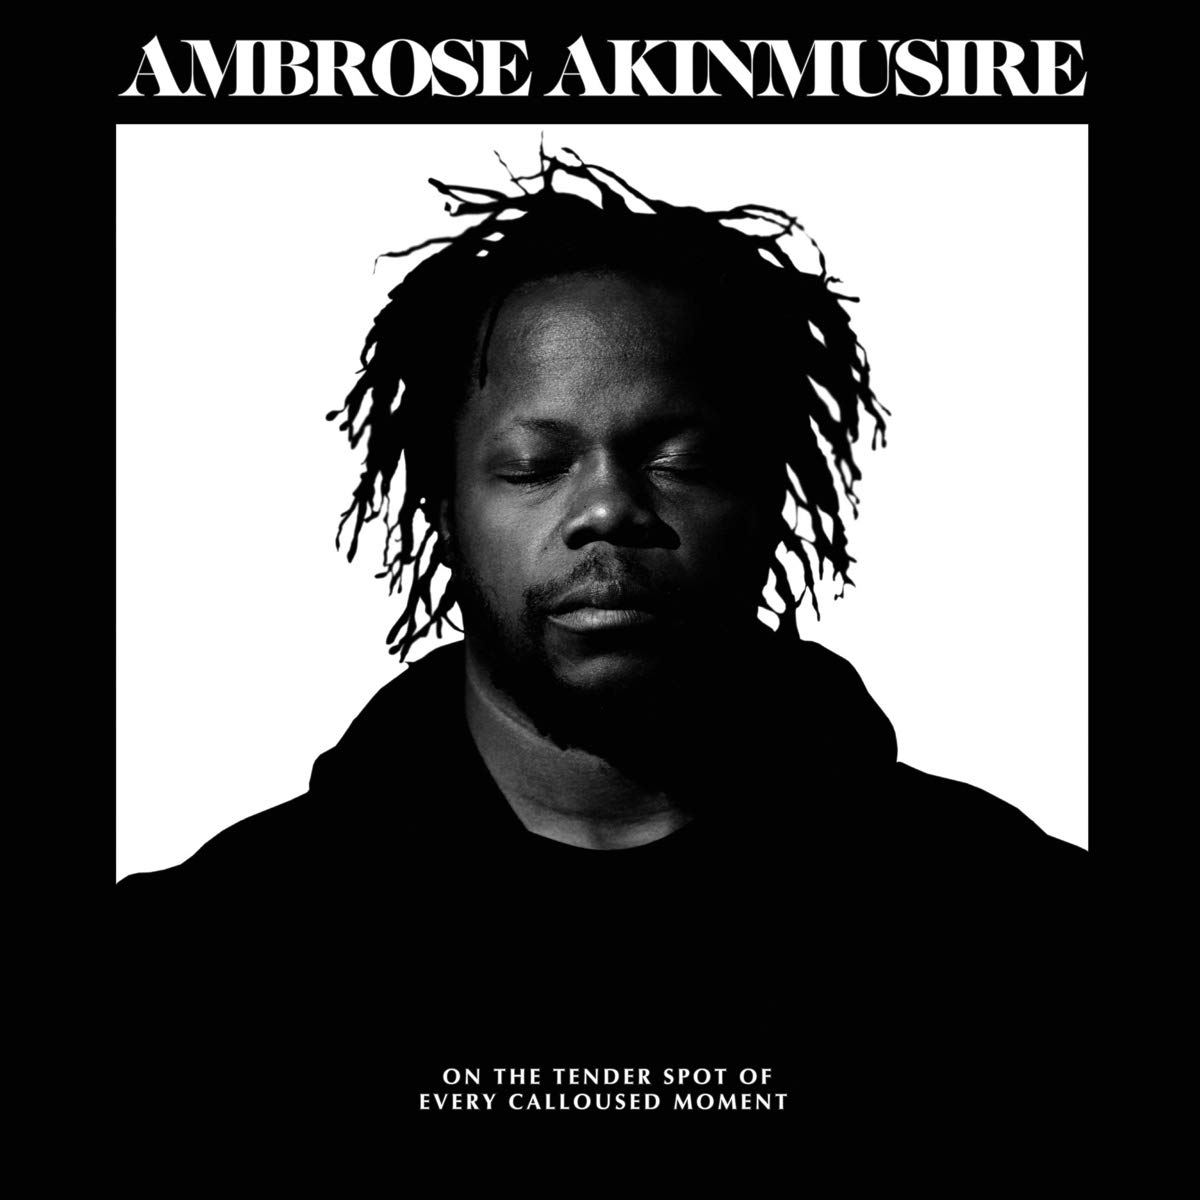 CD Shop - AMBROSE AKINMUSIRE ON THE TENDER SPOT OF